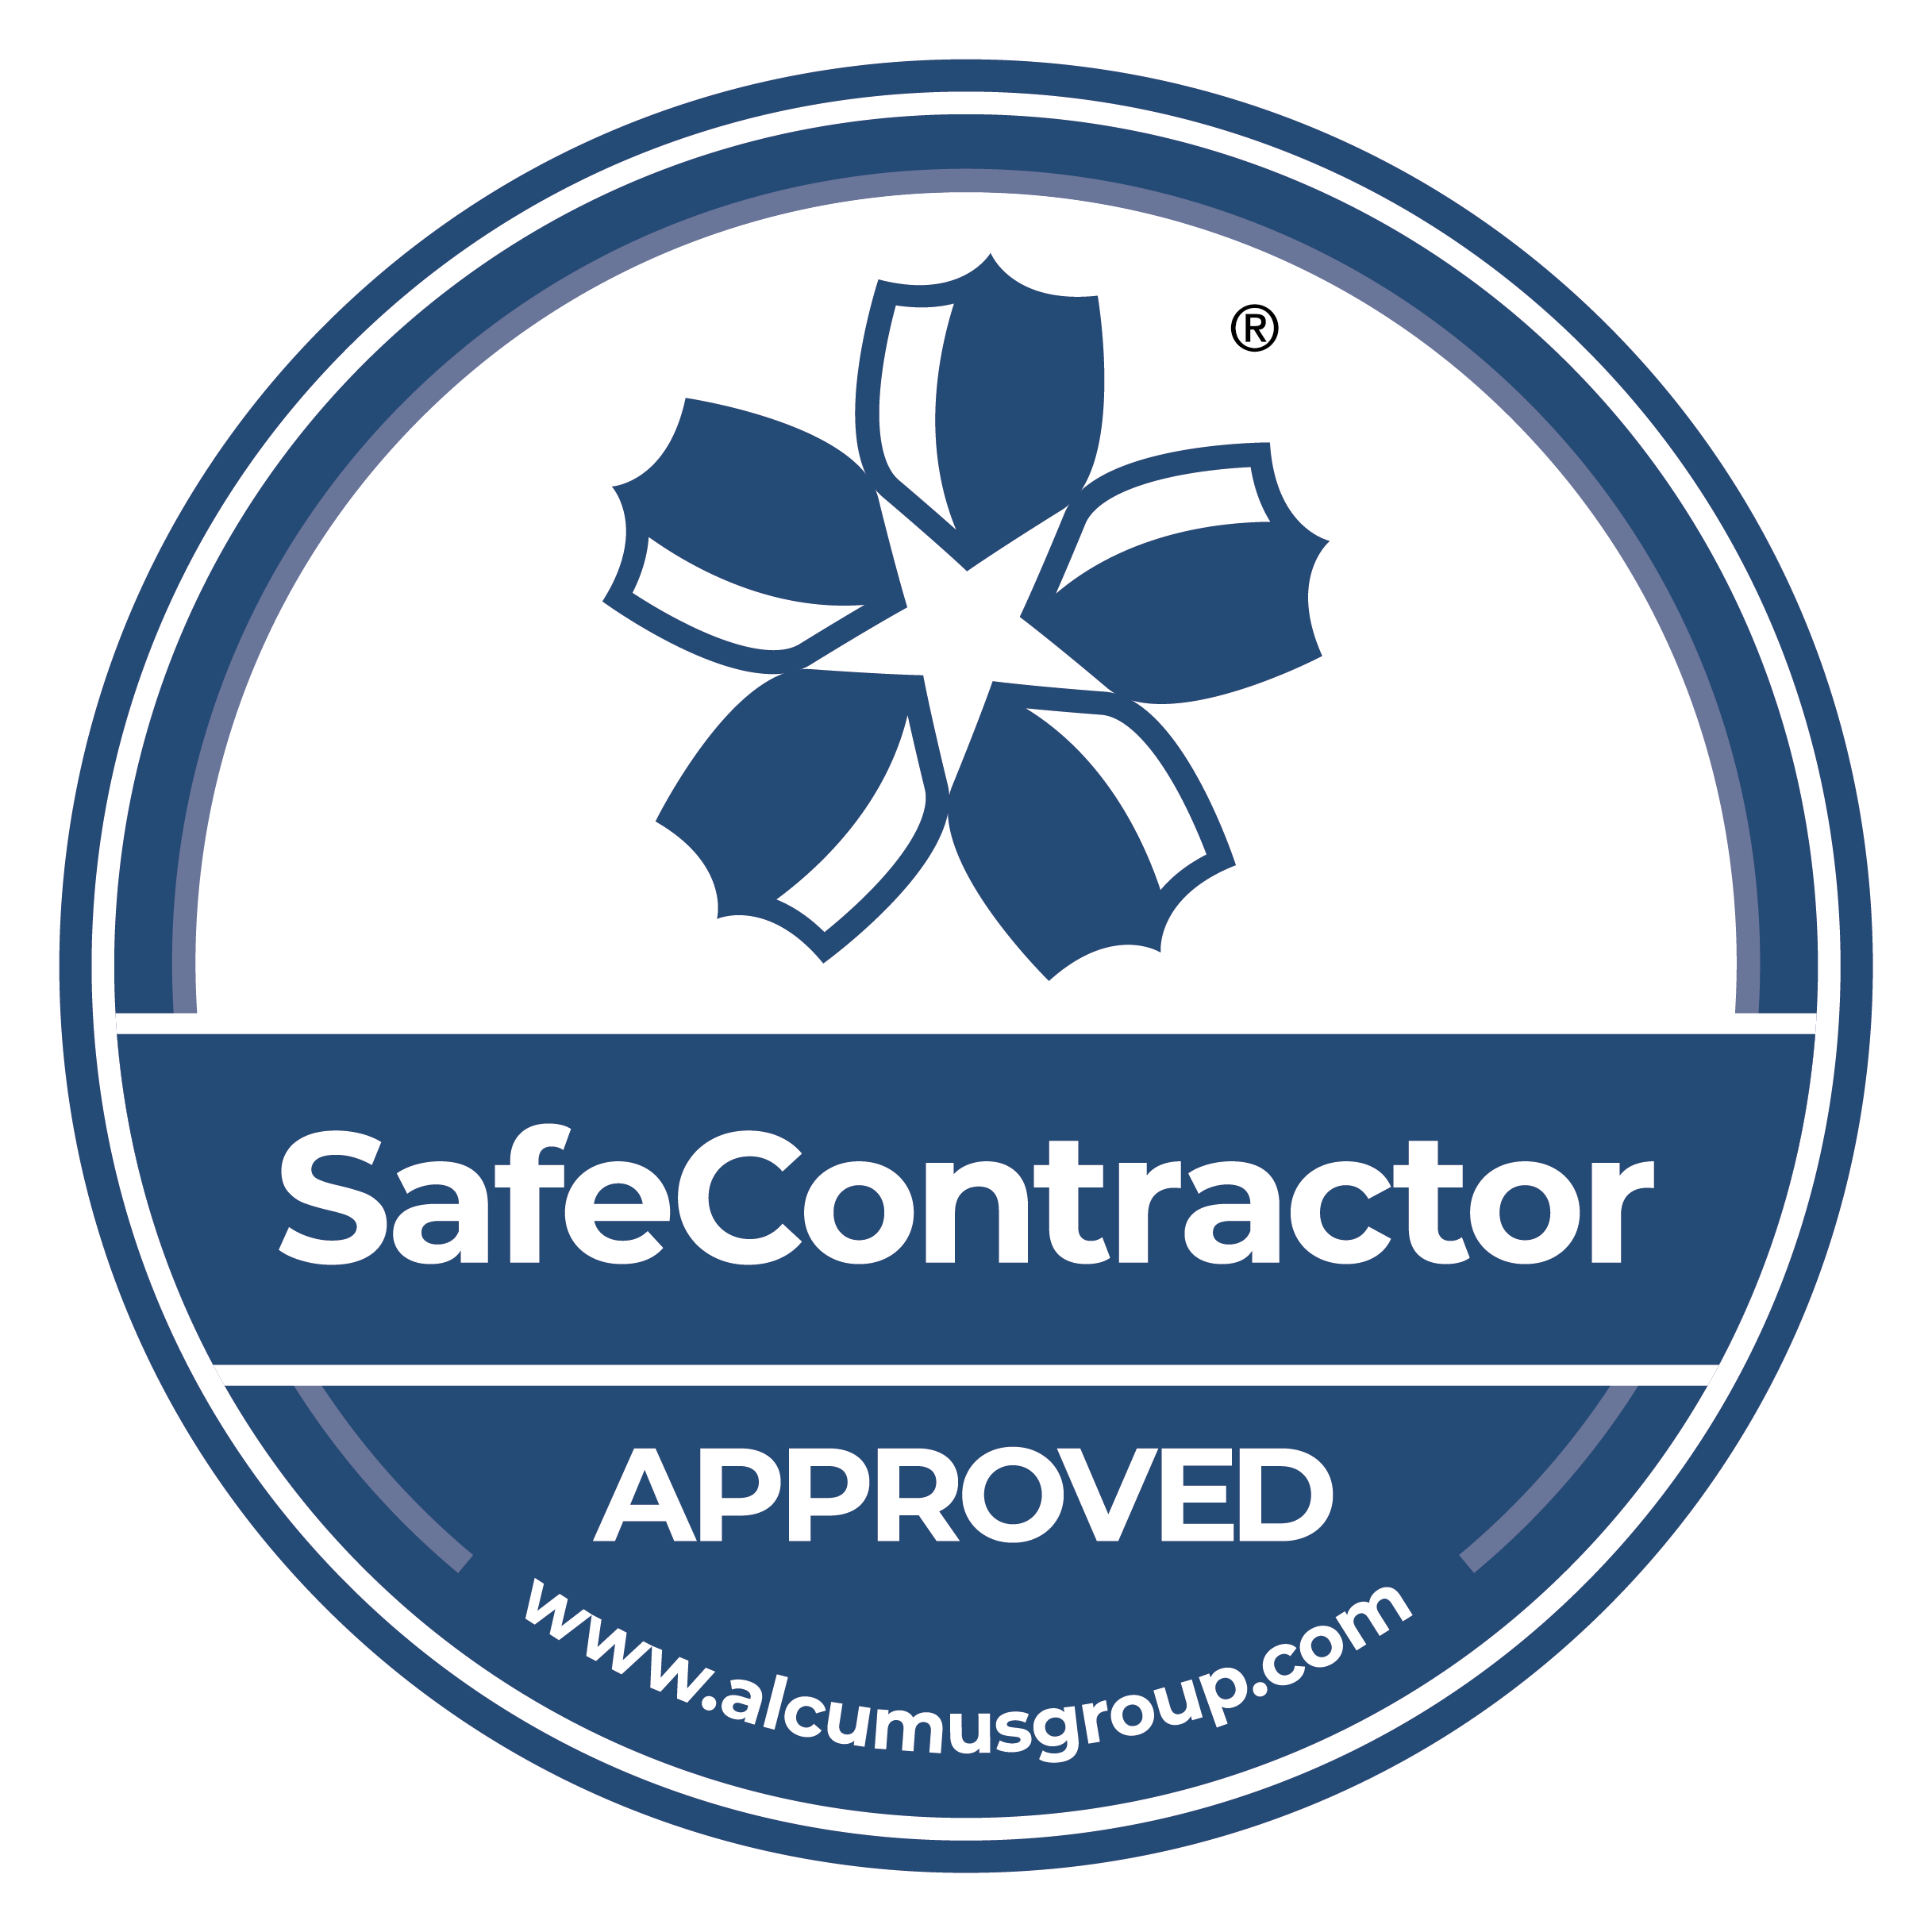 Alcumus Safe Contractor Approved Accreditation logo